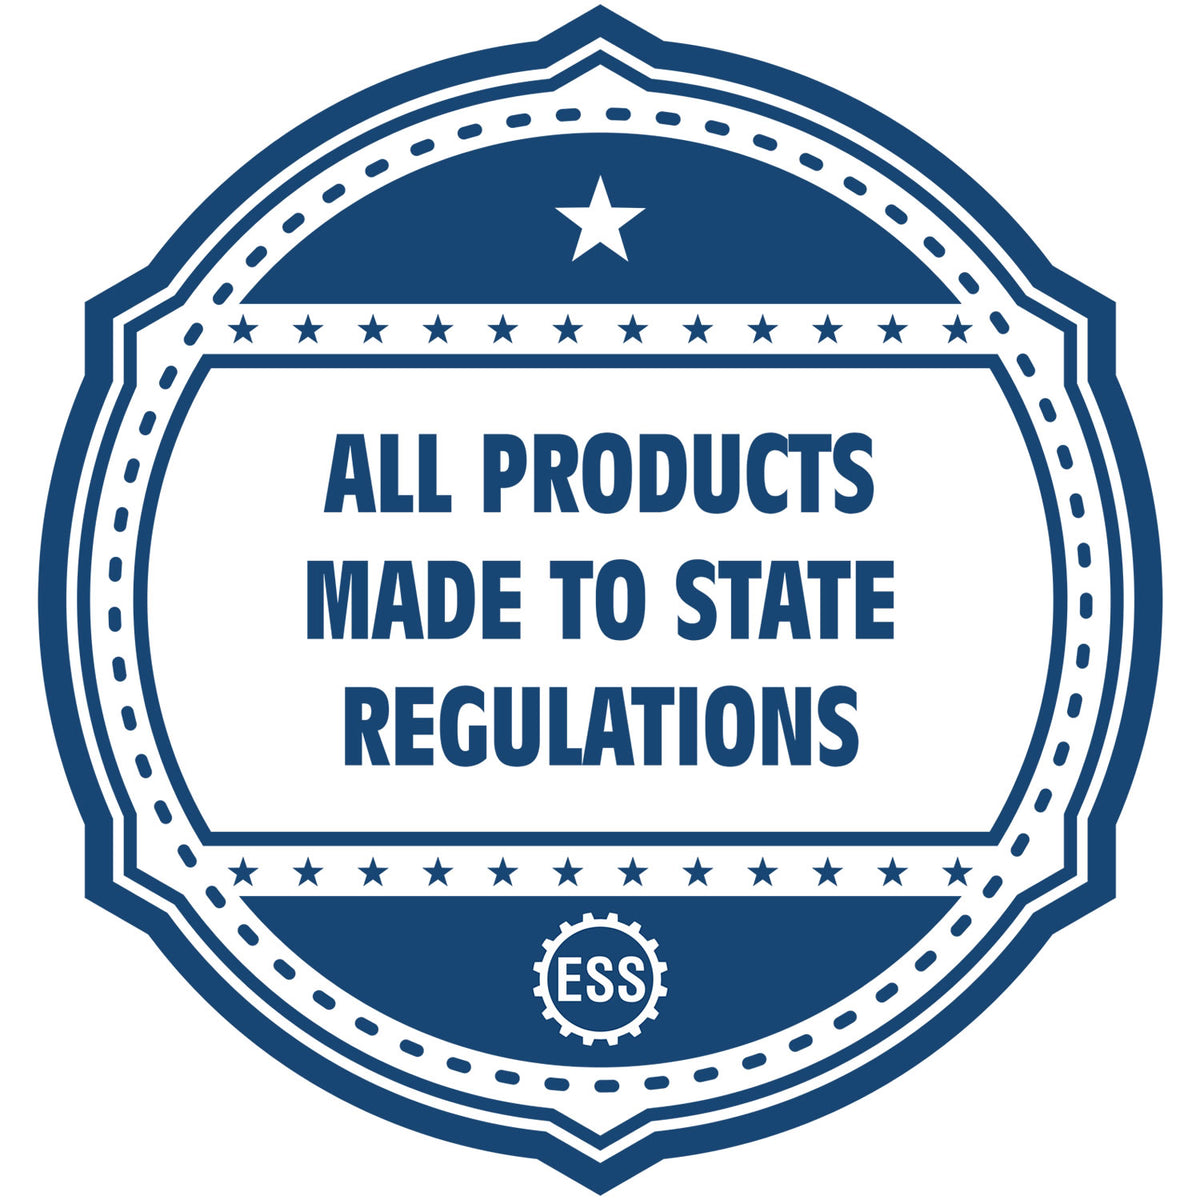 An icon or badge element for the Slim Pre-Inked Kentucky Professional Engineer Seal Stamp showing that this product is made in compliance with state regulations.